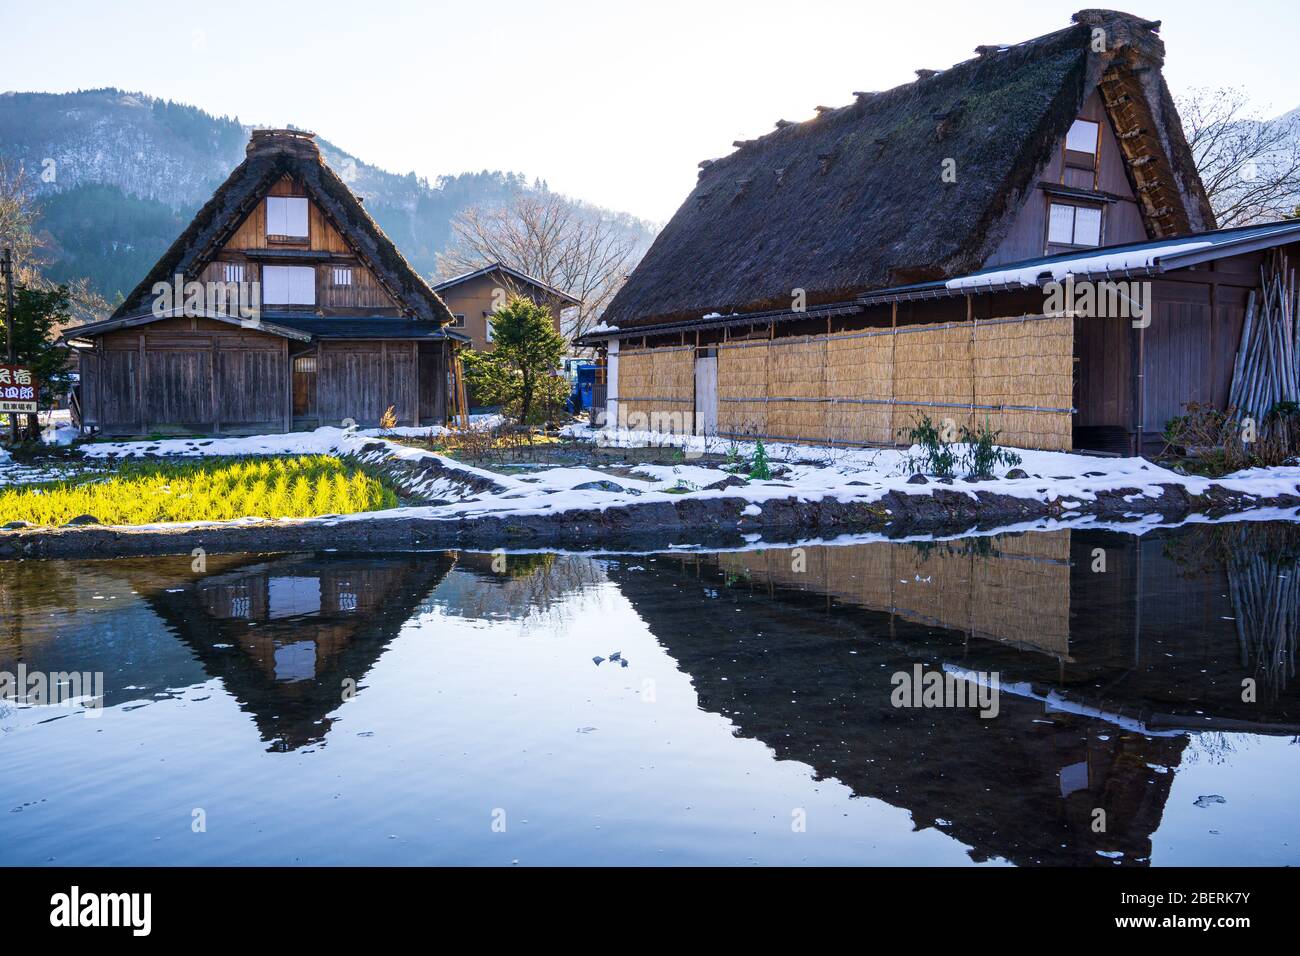 Shirakawa Village had been listed as UNESCO world heritage site in 1995. the farmhouse designed with steep thatched roofs resemble the hands of Buddhi Stock Photo